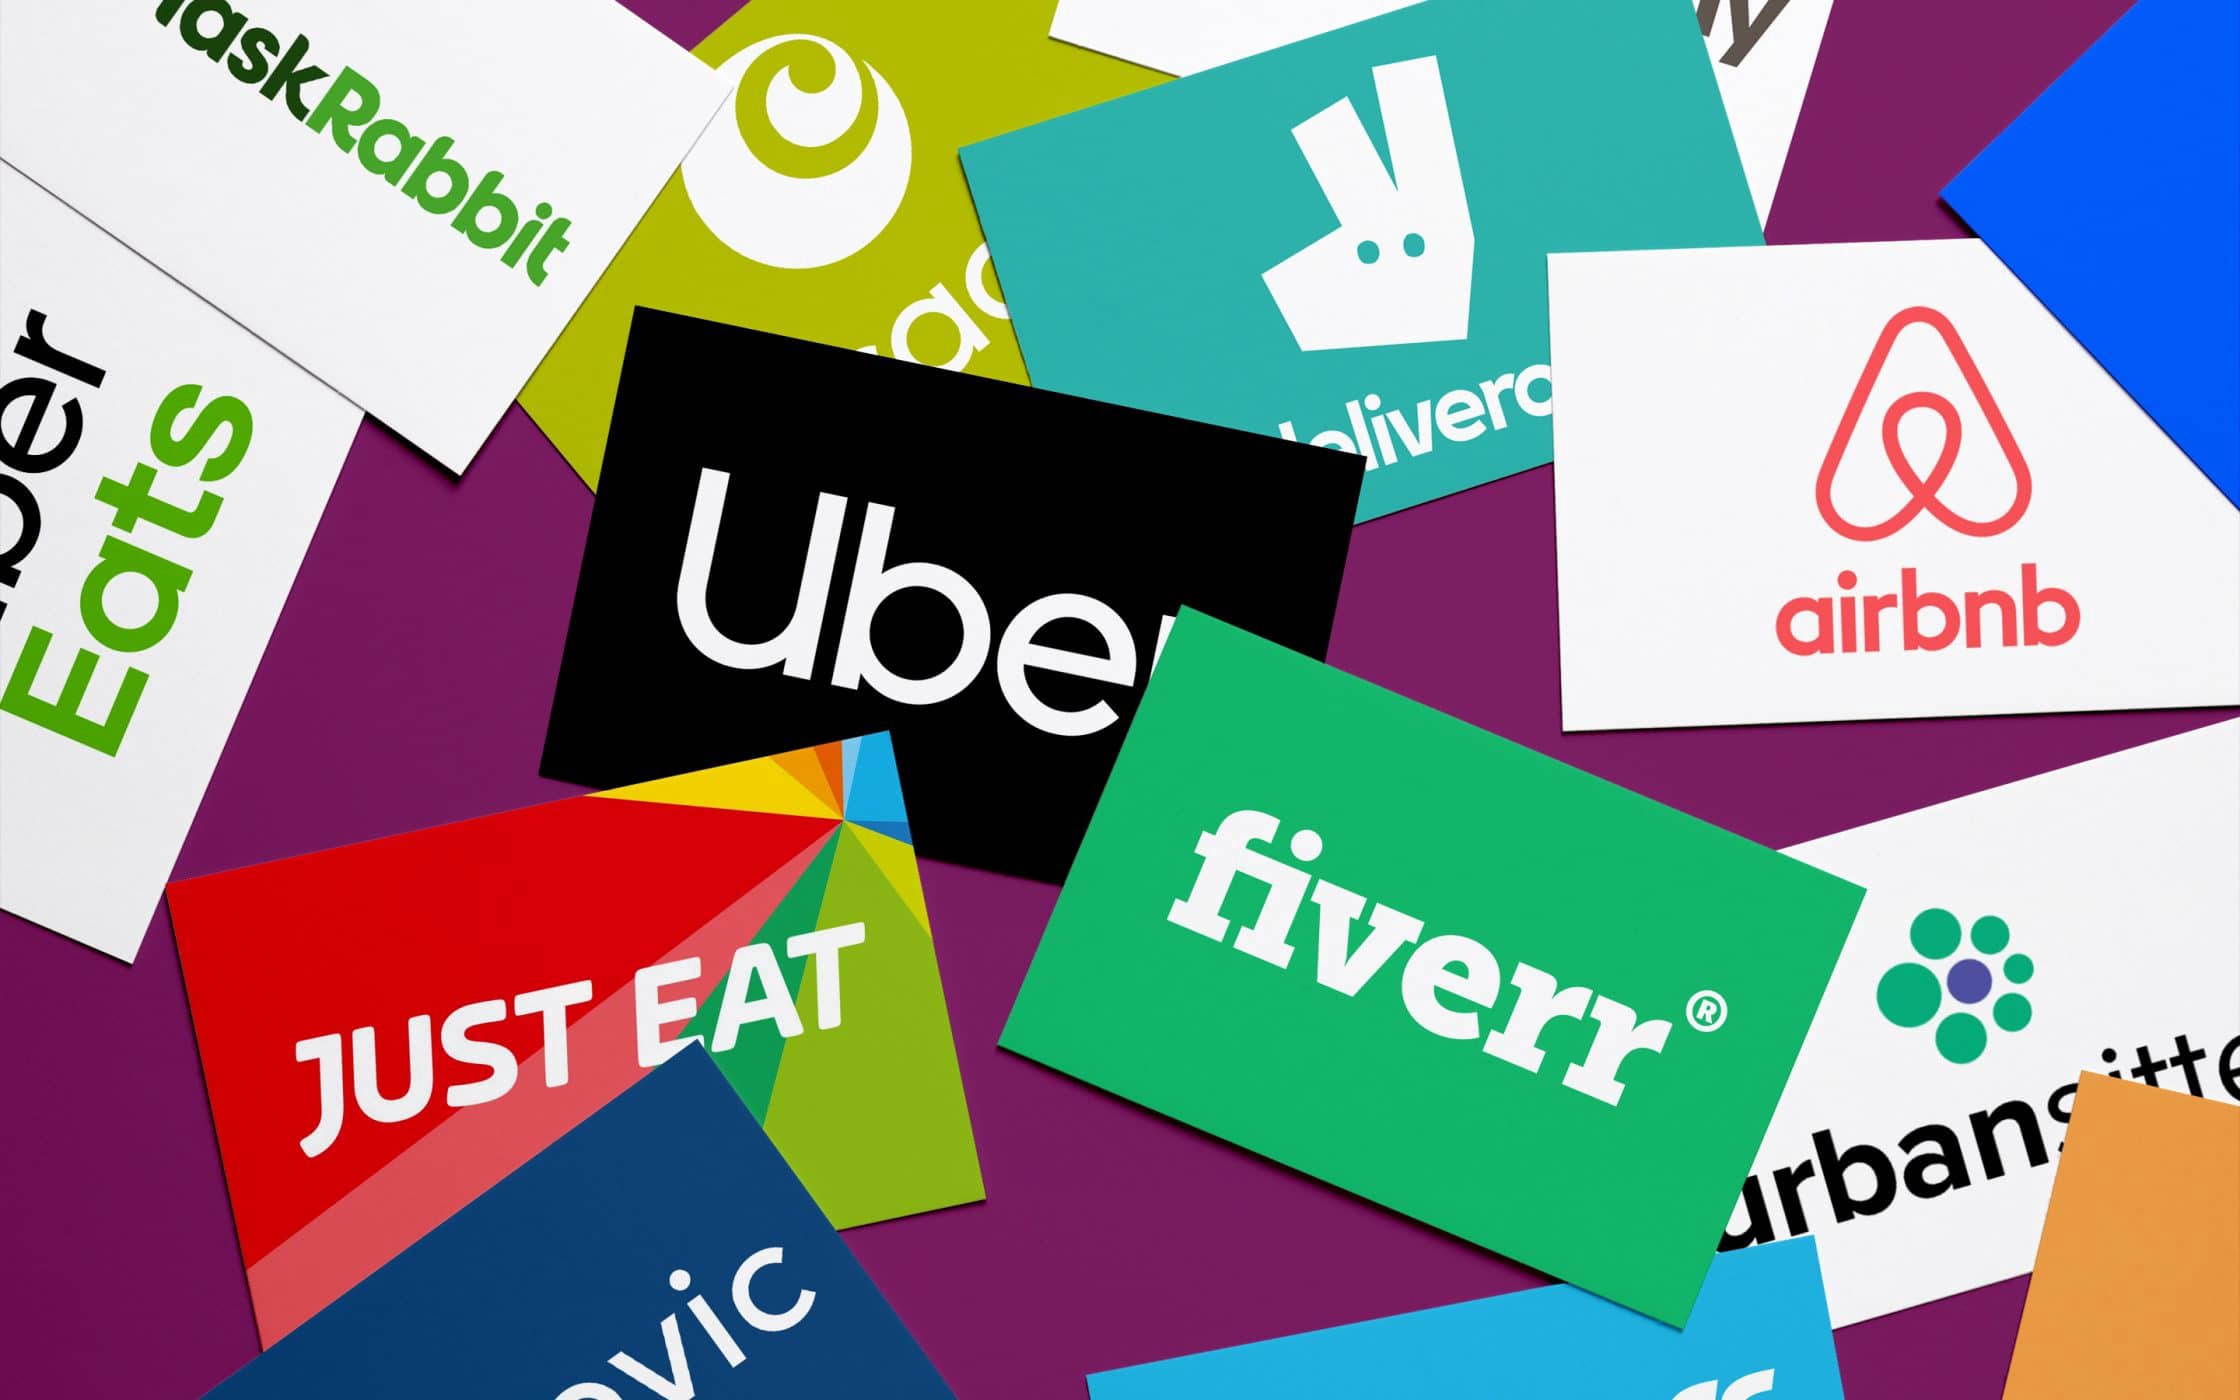 Collage of app-based job logos such as fiverr, Uber, AirBNB, UberEats, and more.